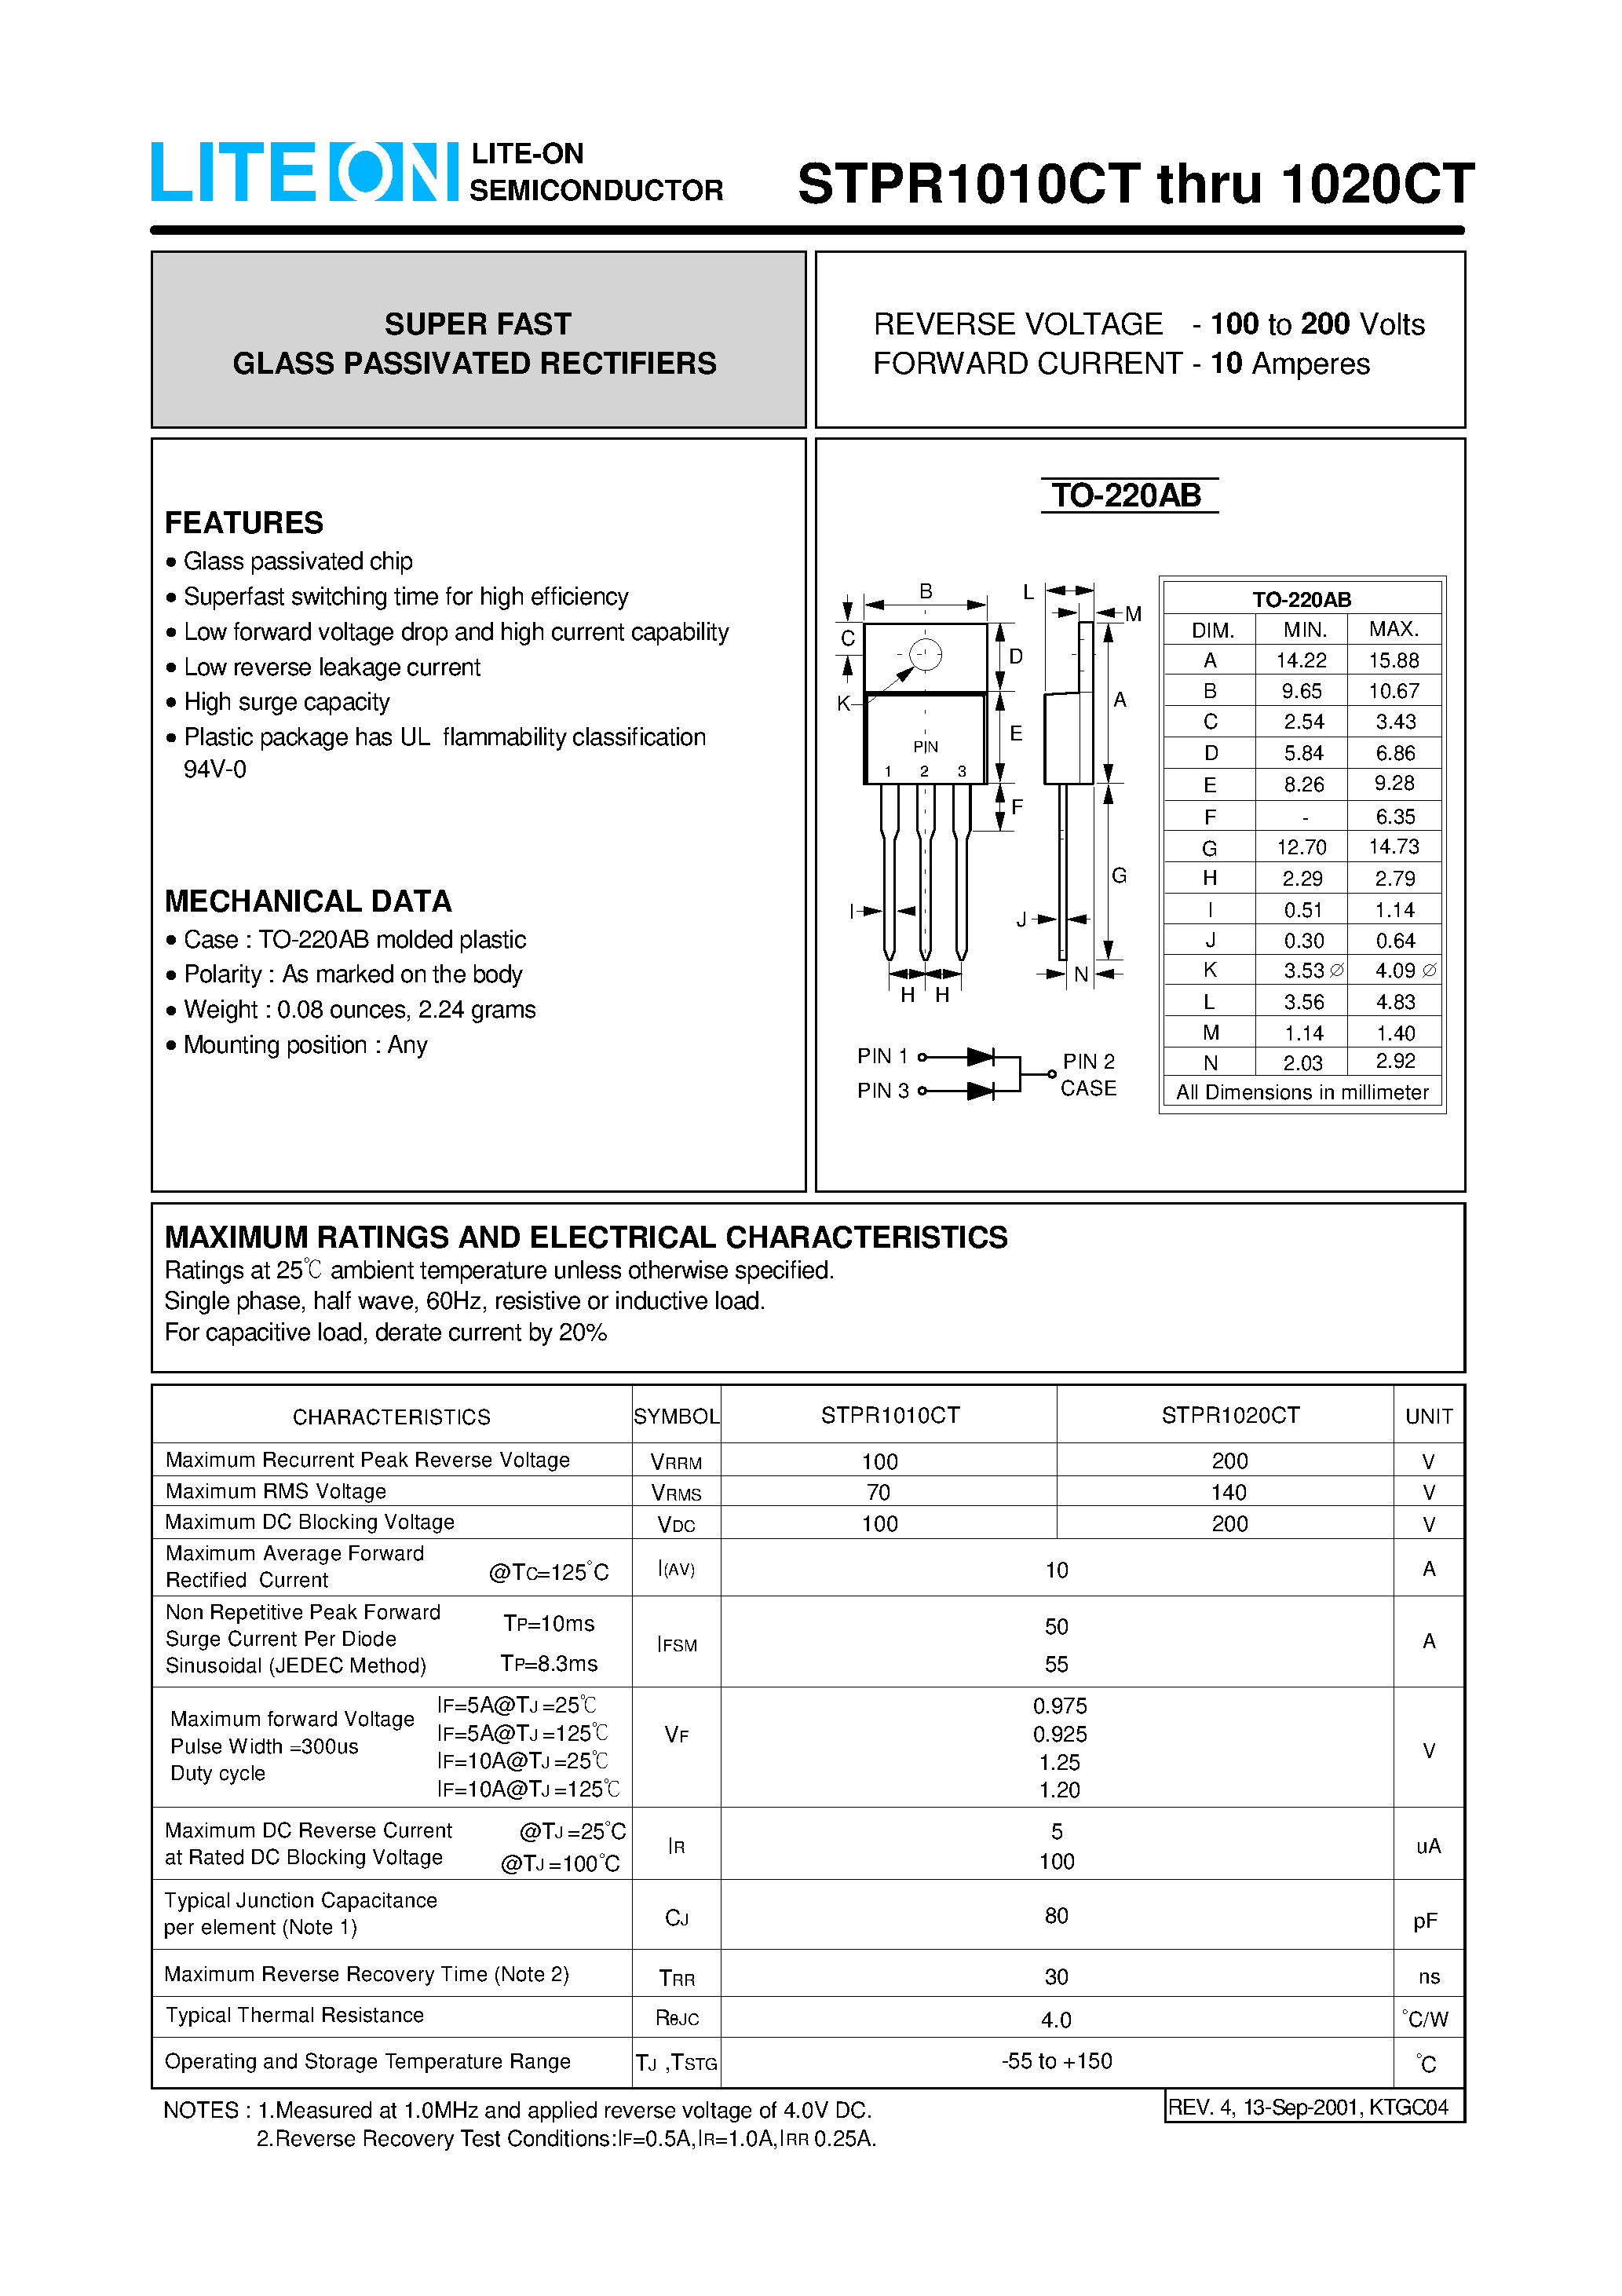 Datasheet STPR1010CT - SUPER FAST GLASS PASSIVATED RECTIFIERS page 1